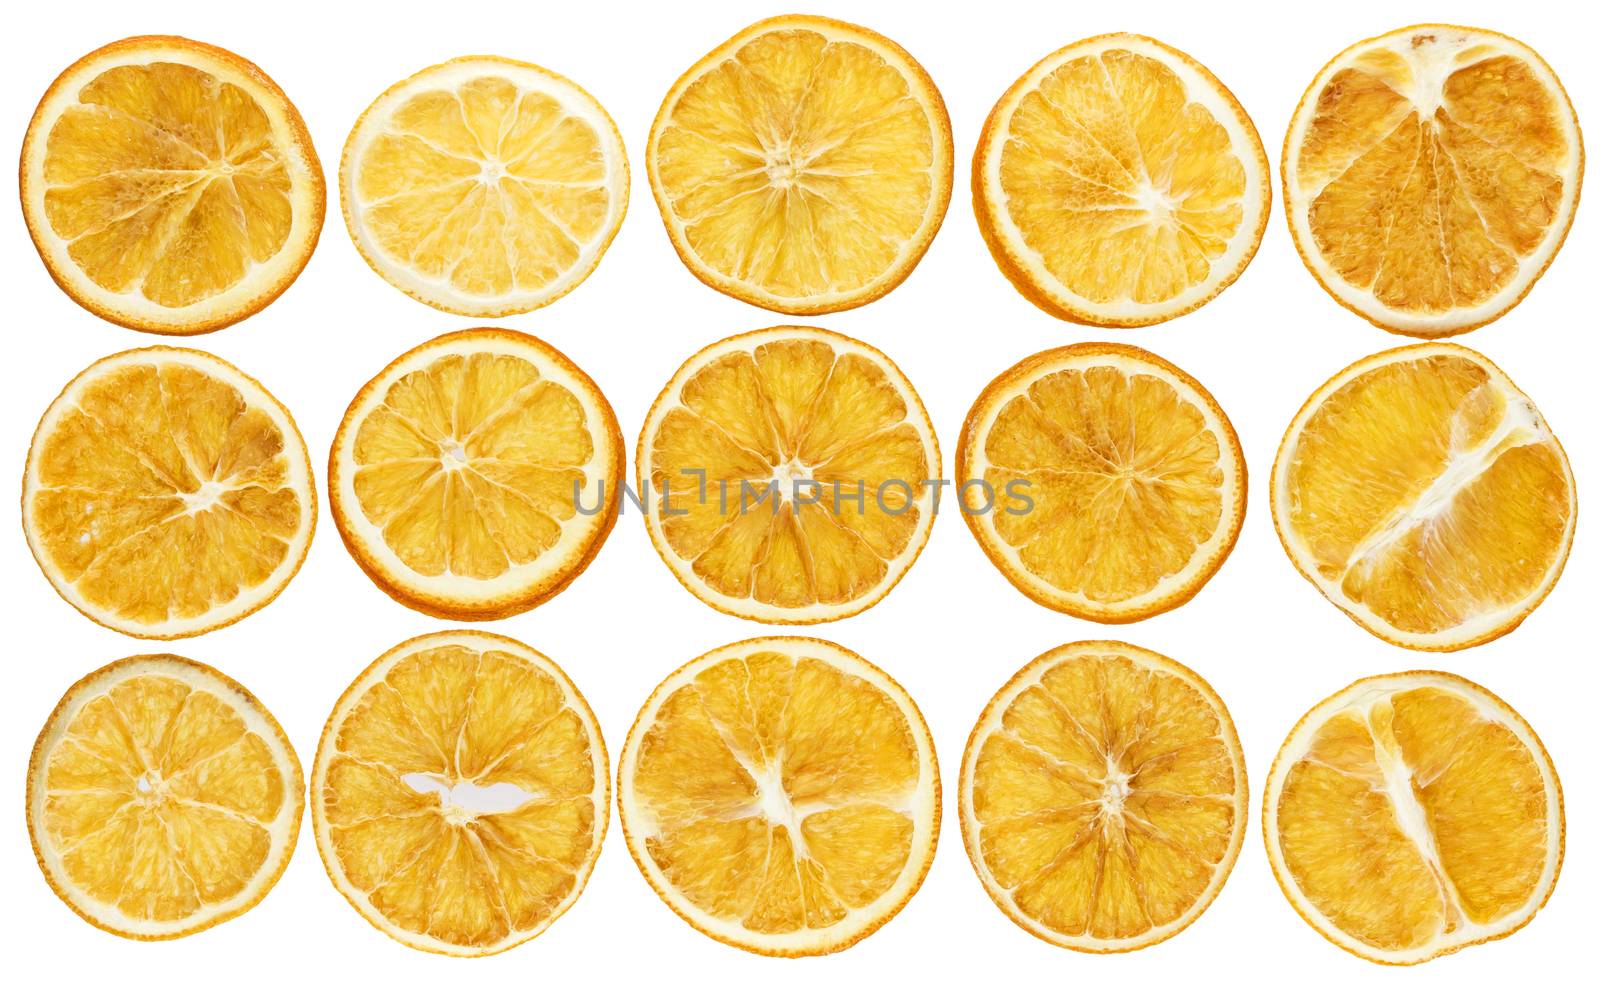 Dried oranges isolated on white background closeup by xamtiw